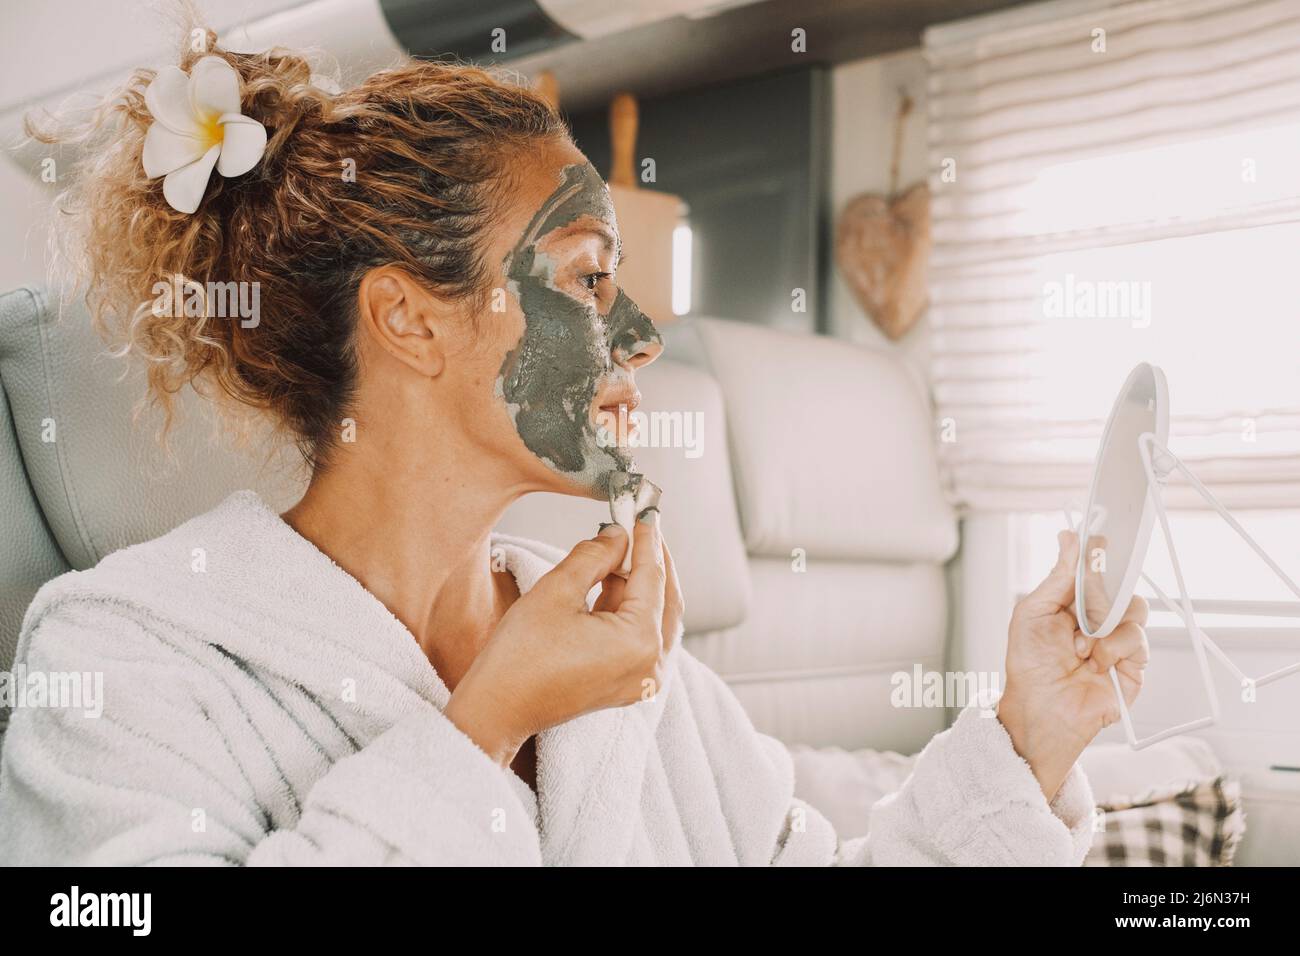 Young adult woman appliying cream beauty skin treatment mask on face using a mirror. Camper van lifestyle and healthy care female people activity. Stock Photo